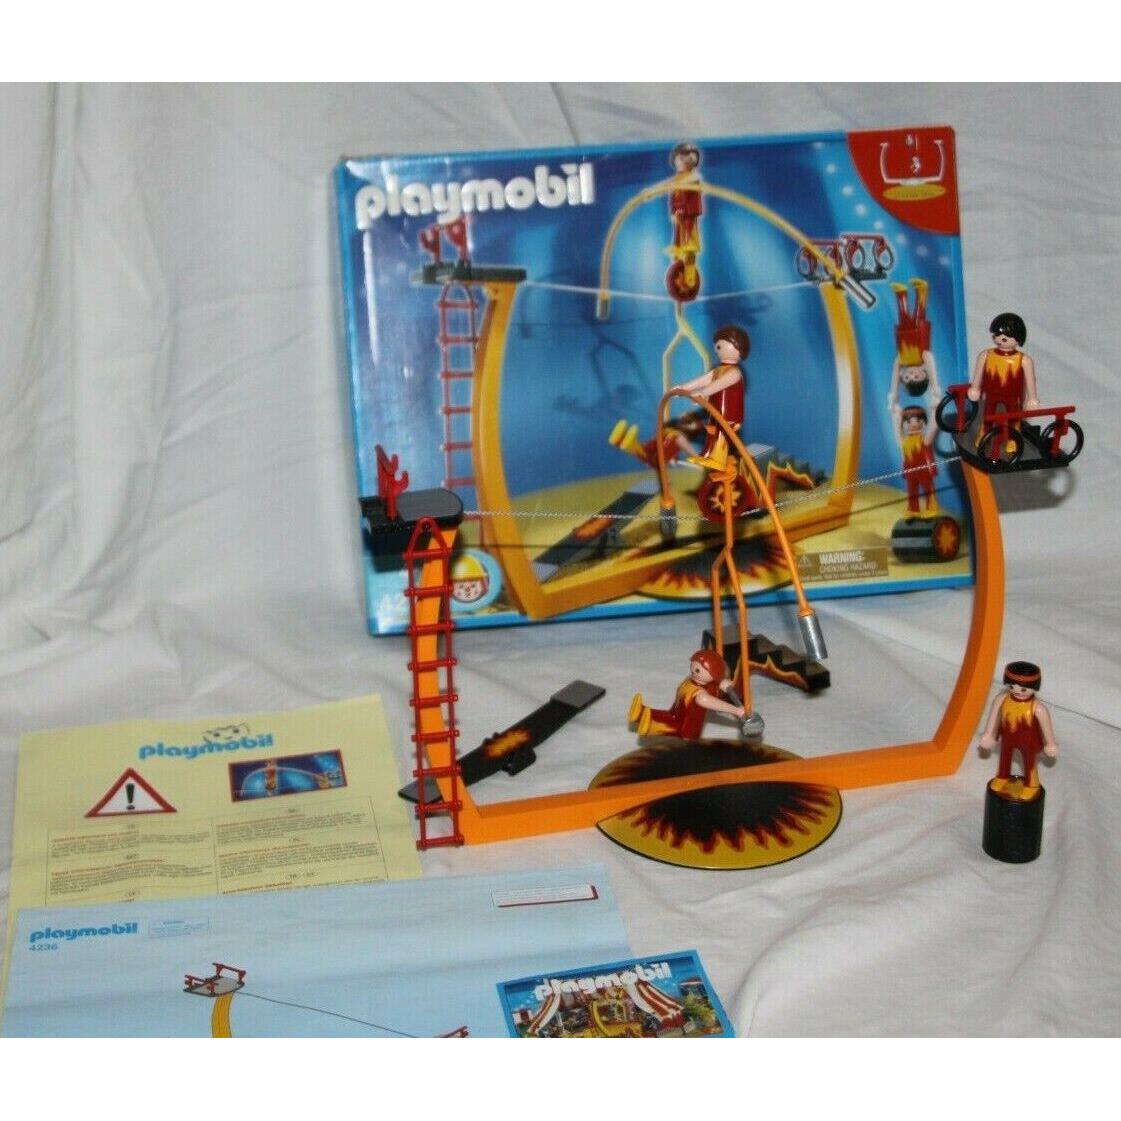 Playmobil Circus 4236 Tightrope Artists Trapeze Acrobat Performers People Box